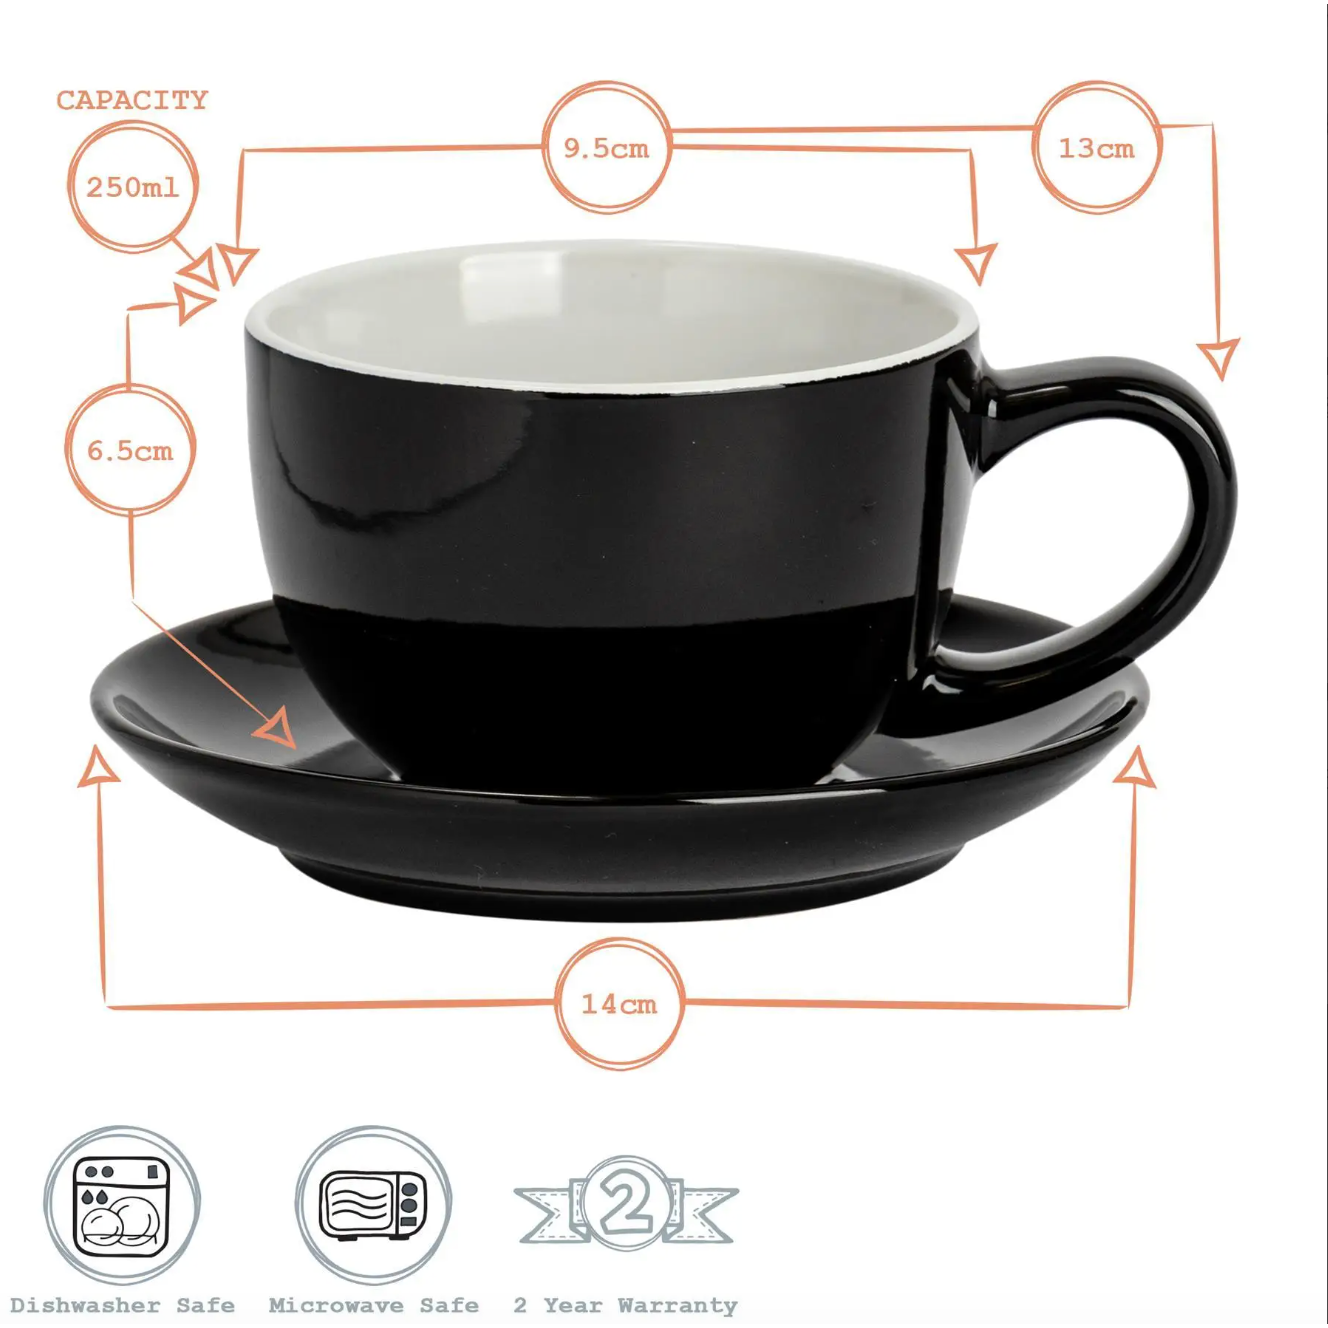 Cappuccino Cup with Saucer - Black